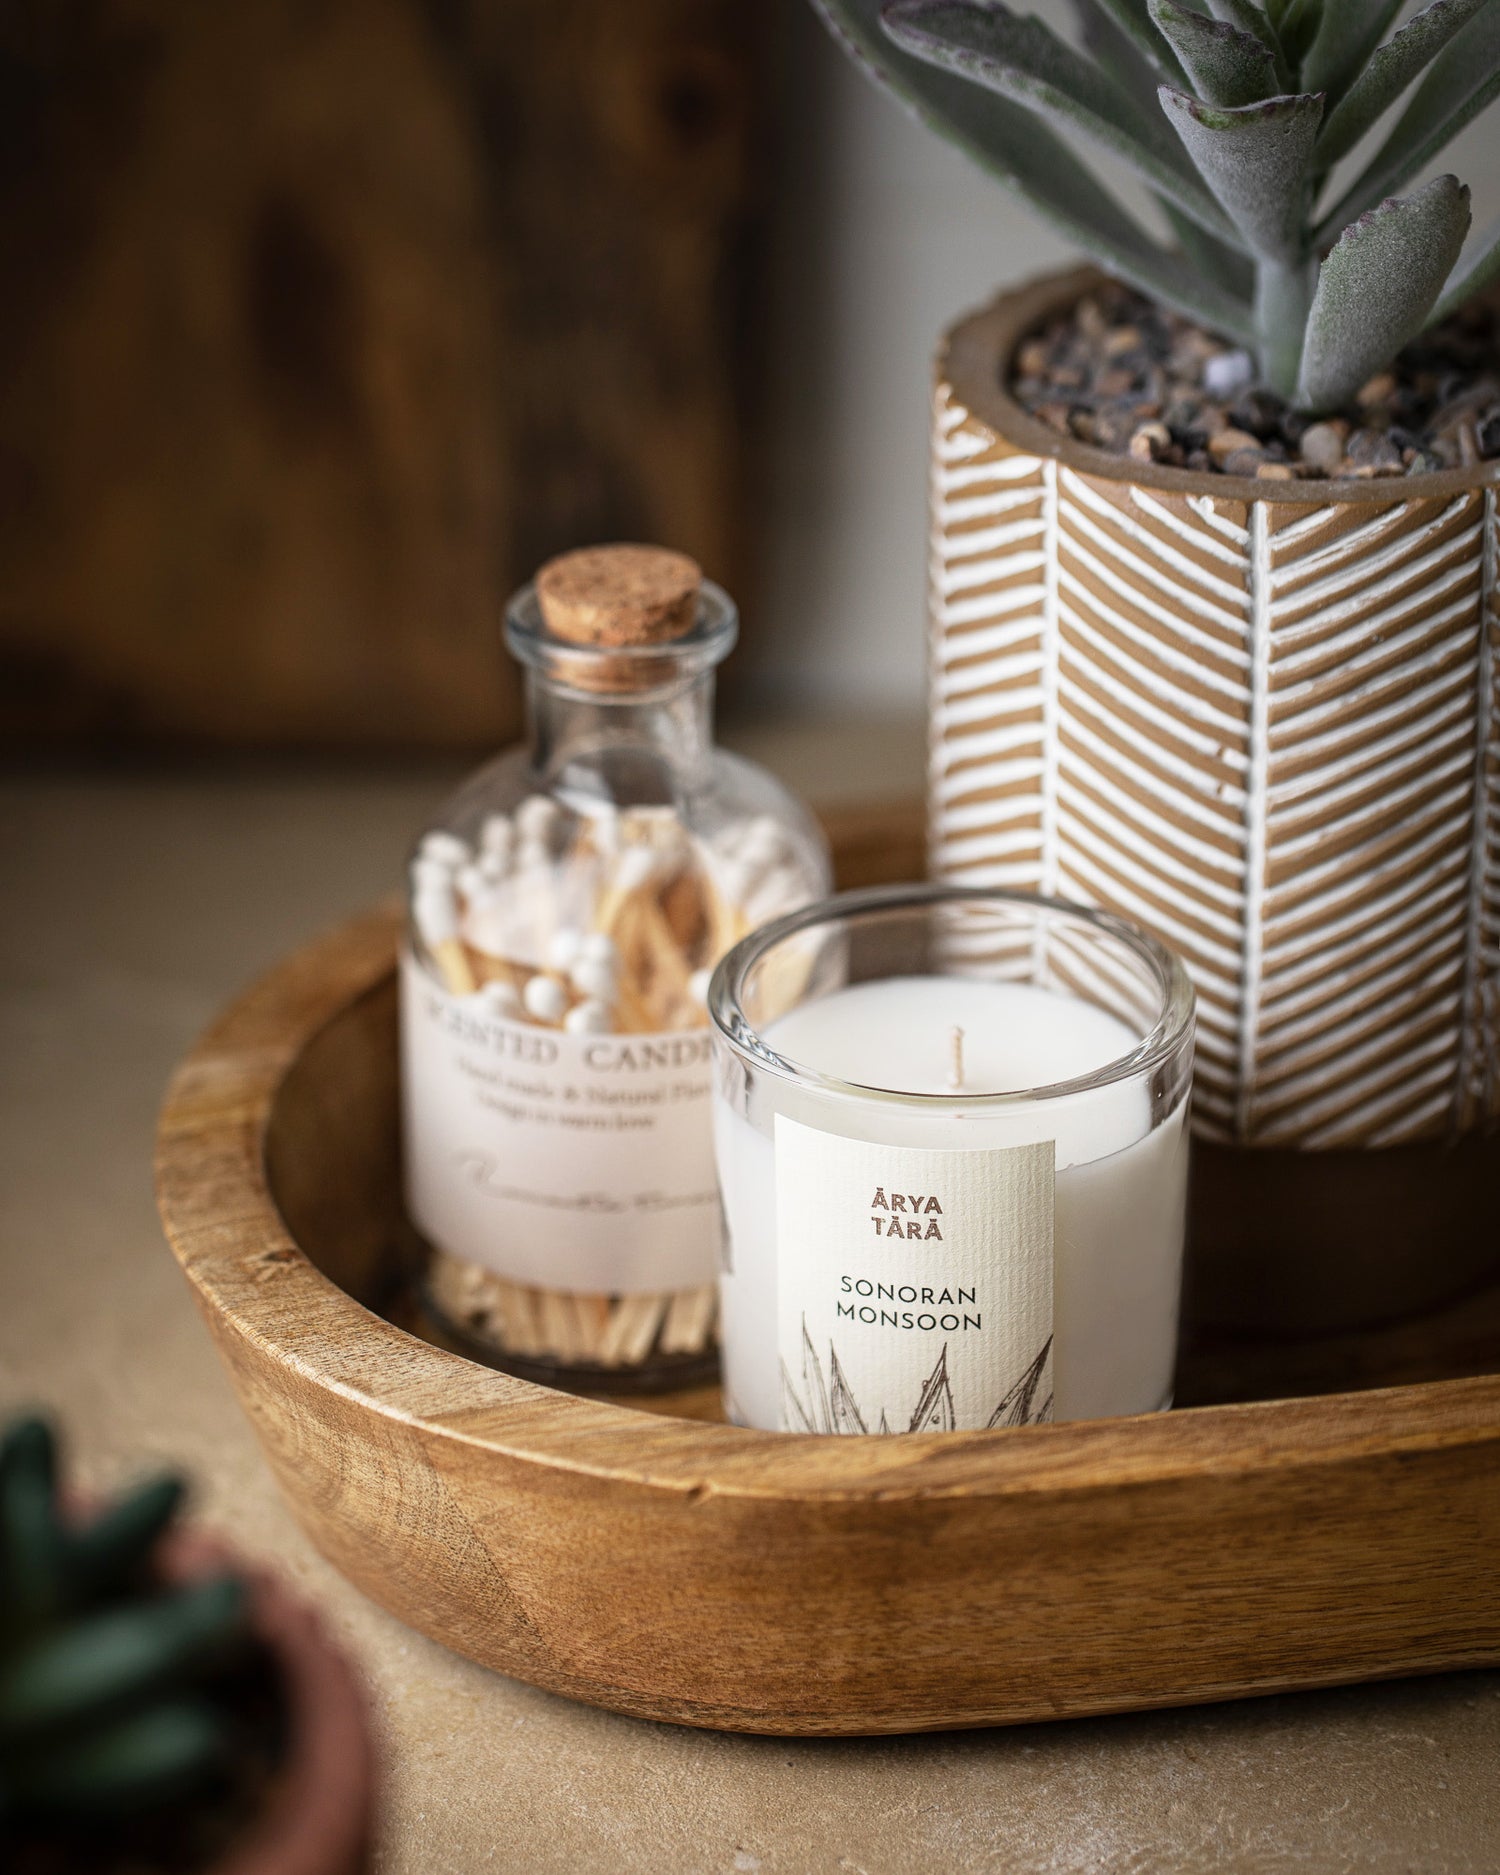 Sonoran Monsoon | Petite Candle